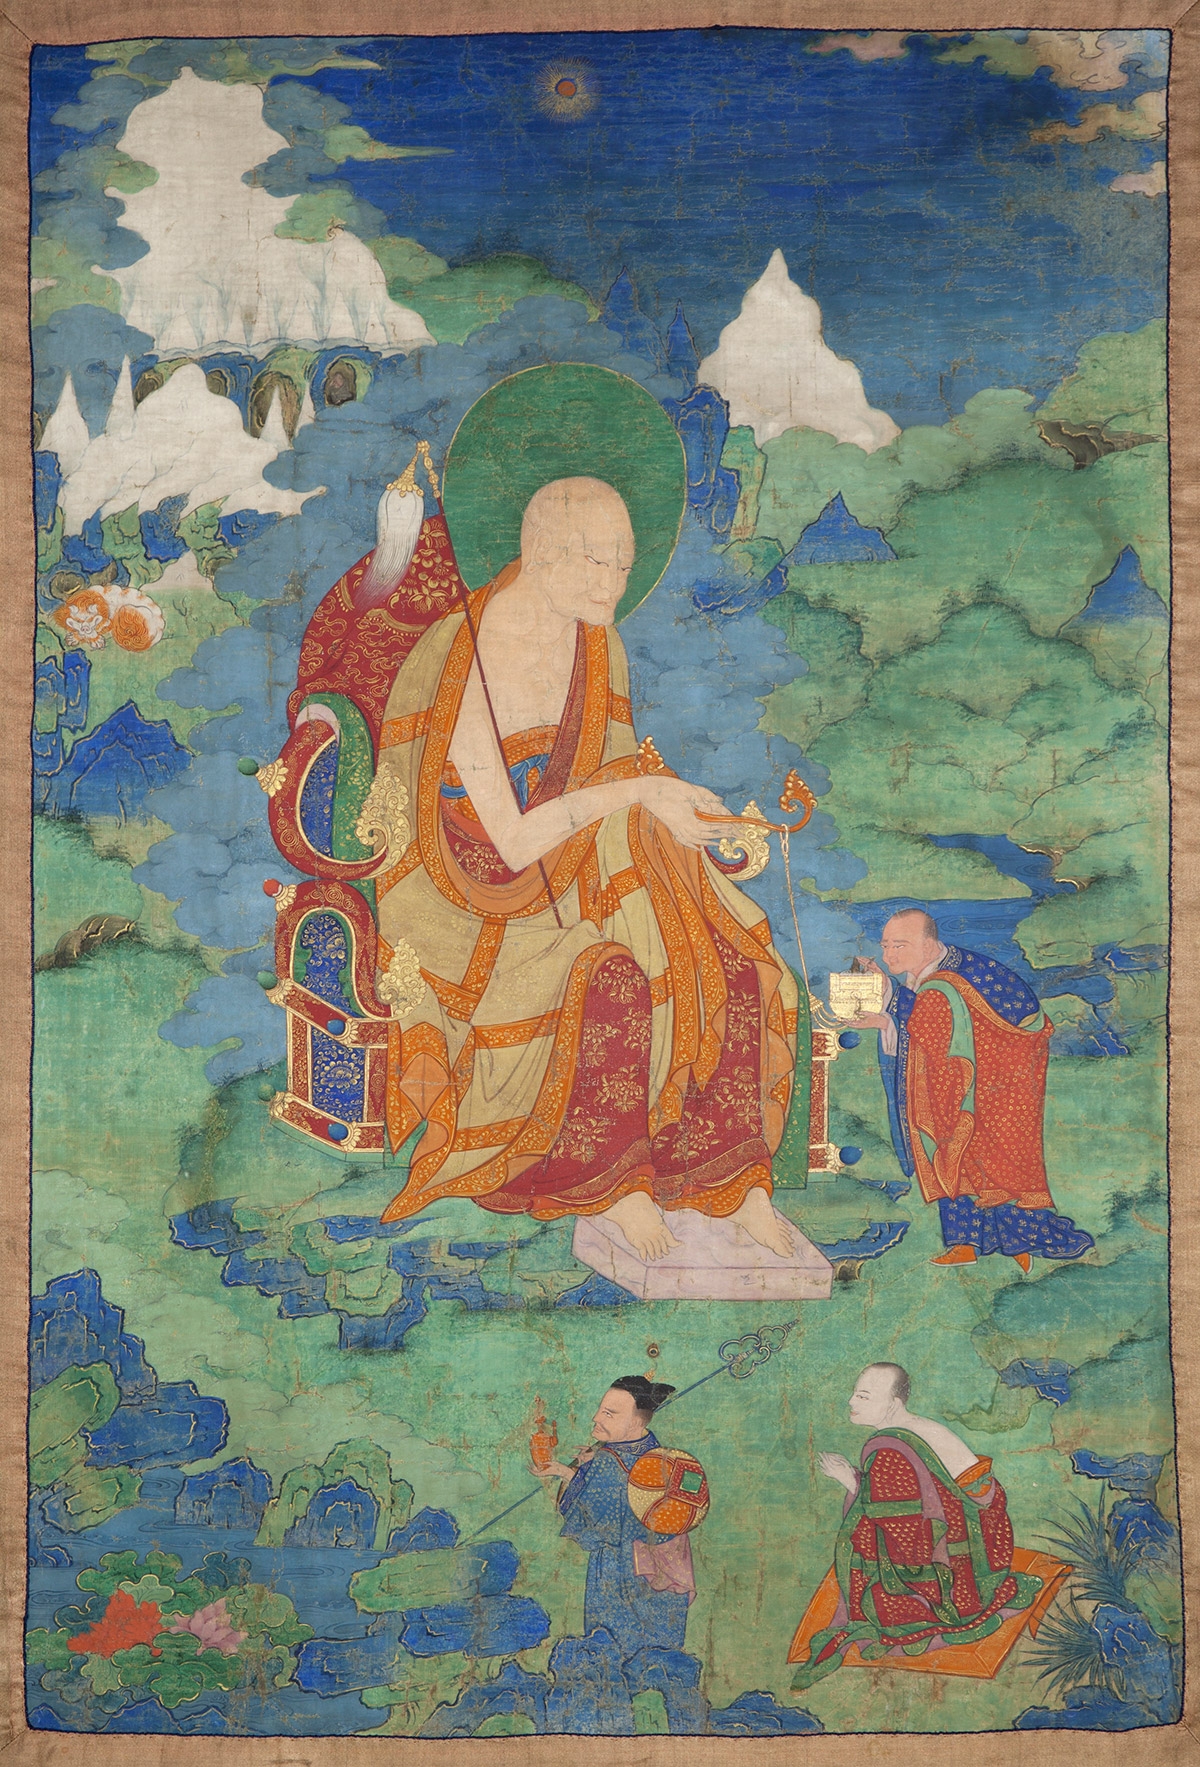 Angaja Arhat. 17th century. Possibly Kham (East Tibet). Tradition: Gelug. Pigments on cloth. MU-CIV/MAO "Giuseppe Tucci," inv. 998/830. Placement as indicated on verso: 1st from right. Image courtesy of the Museum of Civilisation/Museum of Oriental Art "Giuseppe Tucci," Rome.